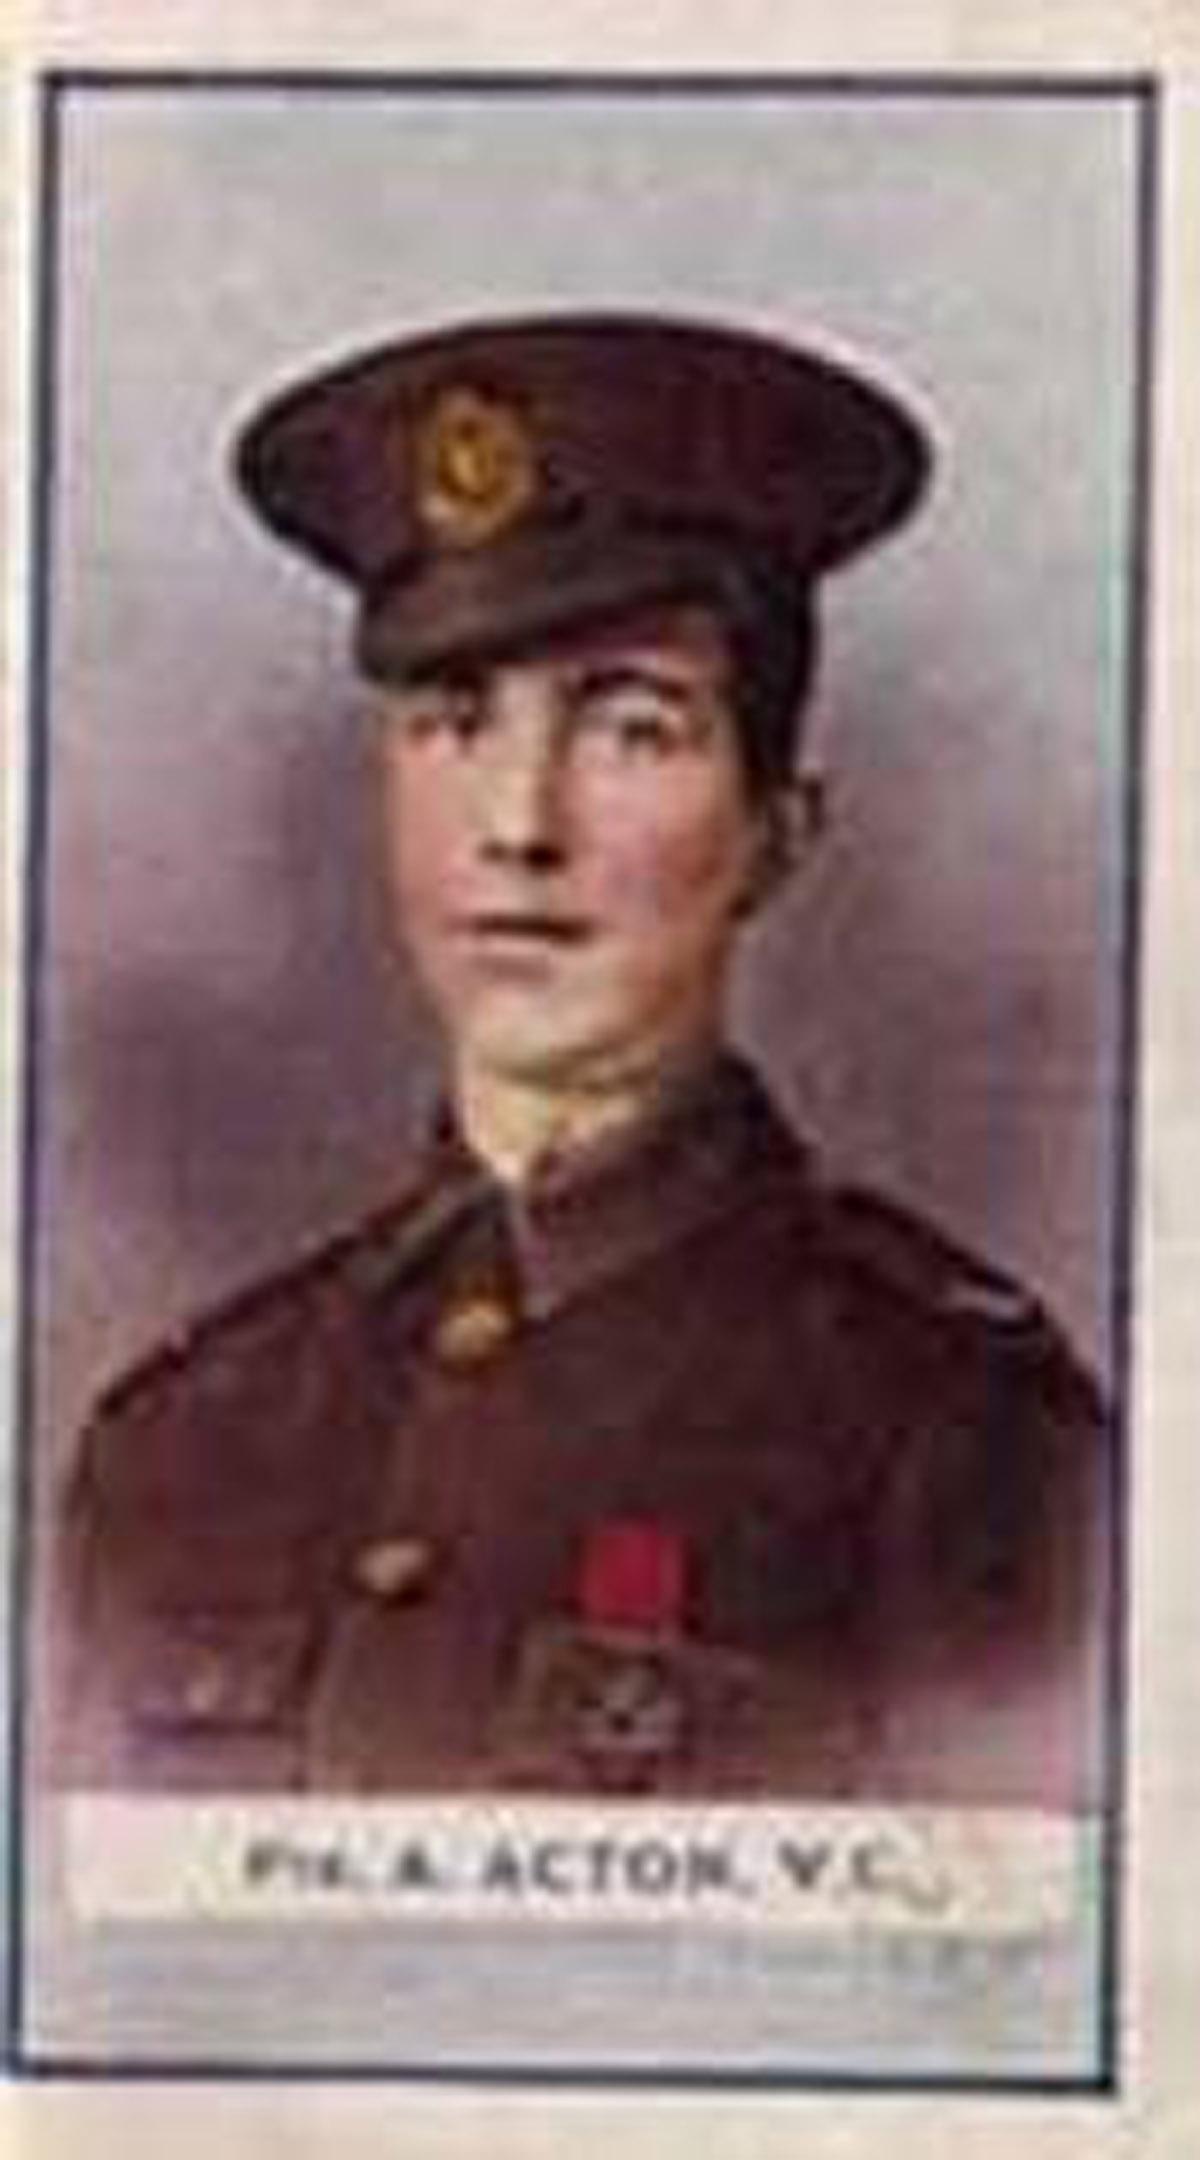 Victoria Cross winner Abraham Acton, of Whitehaven, who served with the Border Regiment